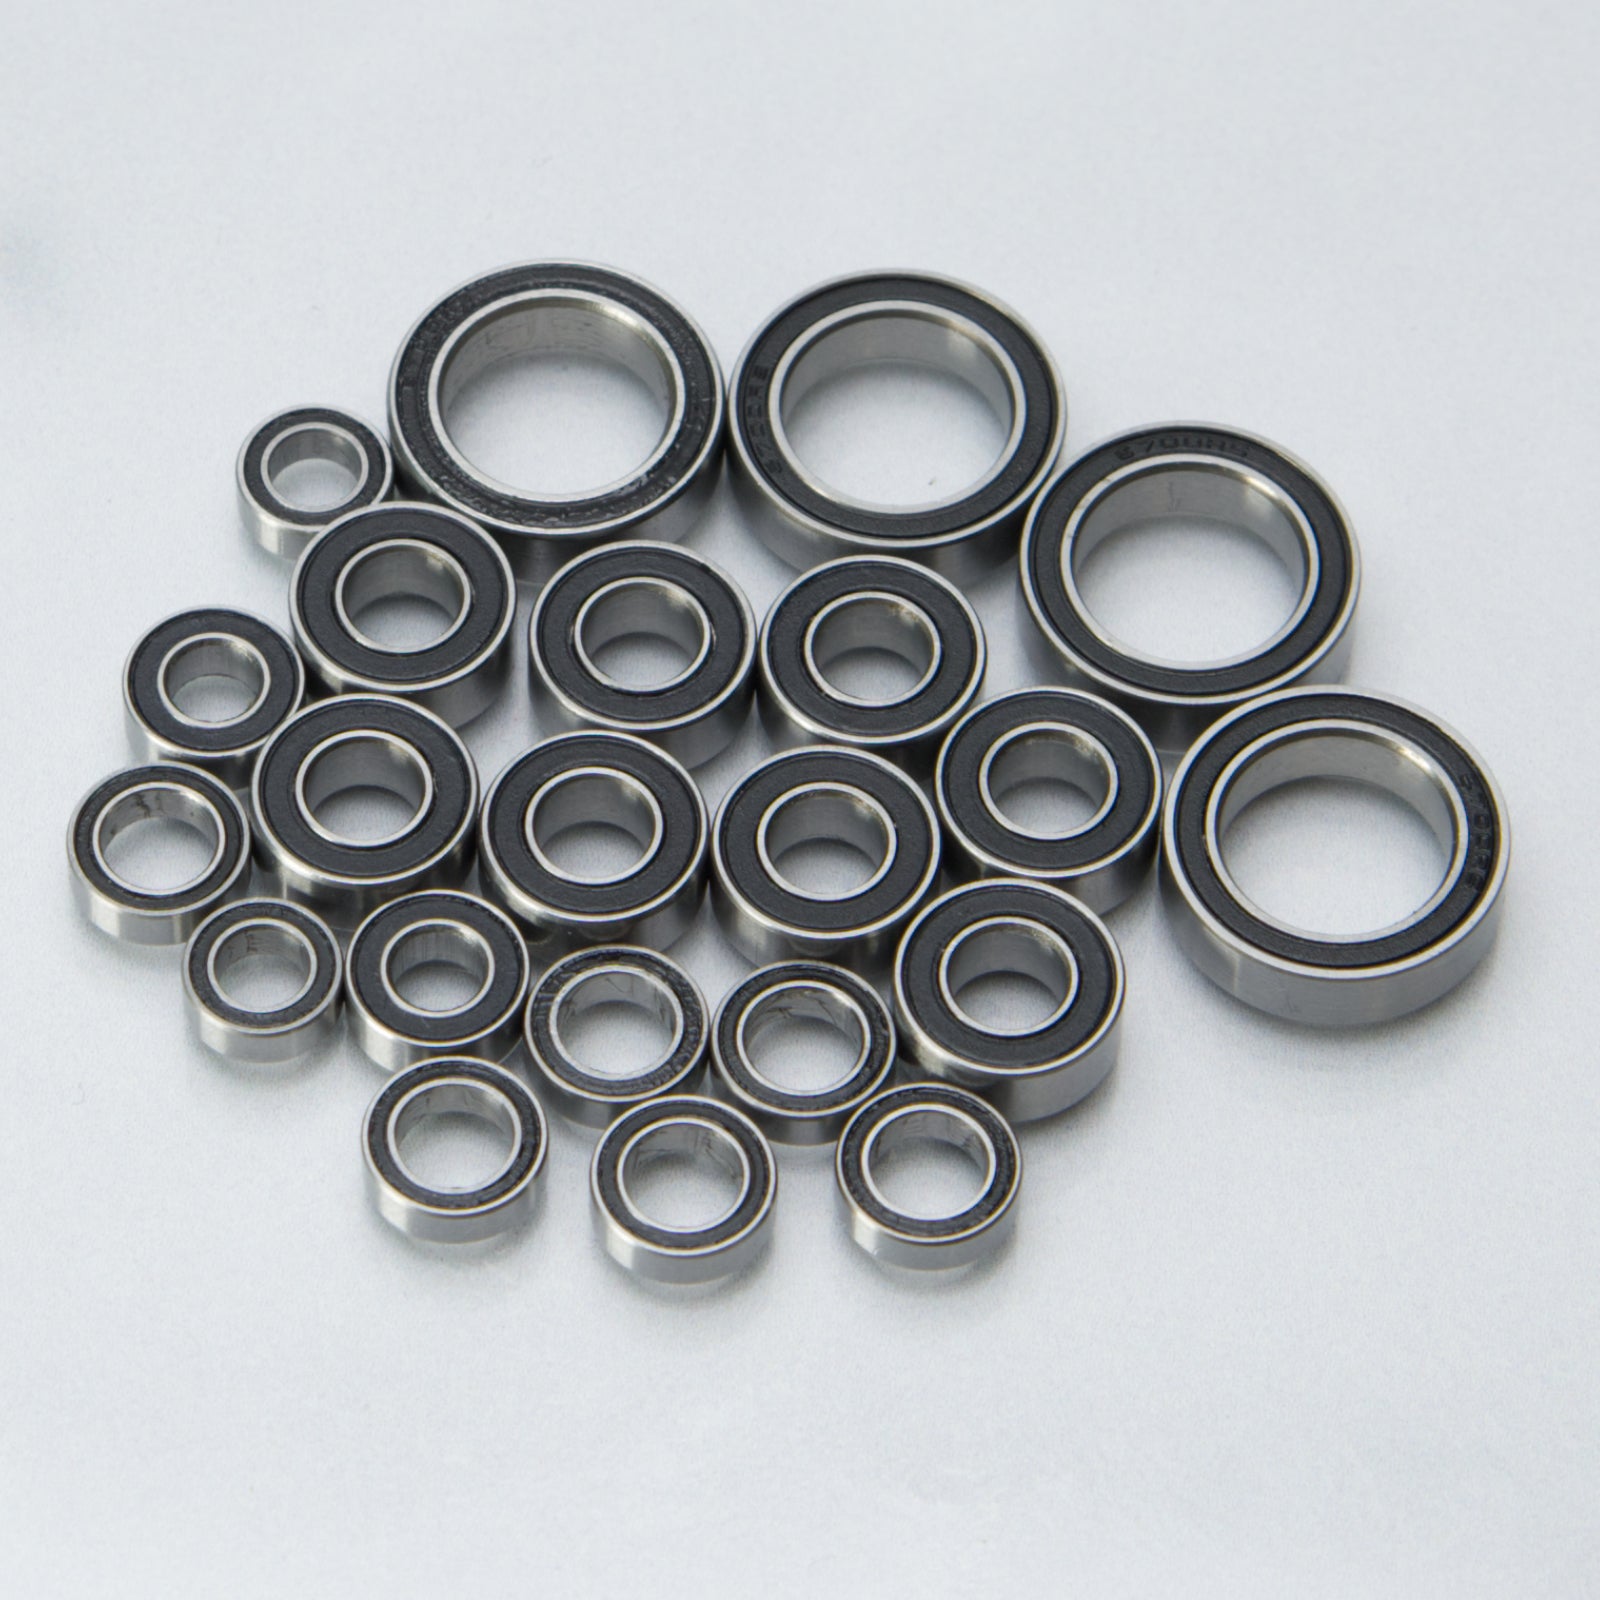 HB Racing Hot Bodies Cyclone D4, Hot Bodies Cyclone S - Sealed Bearing Kit